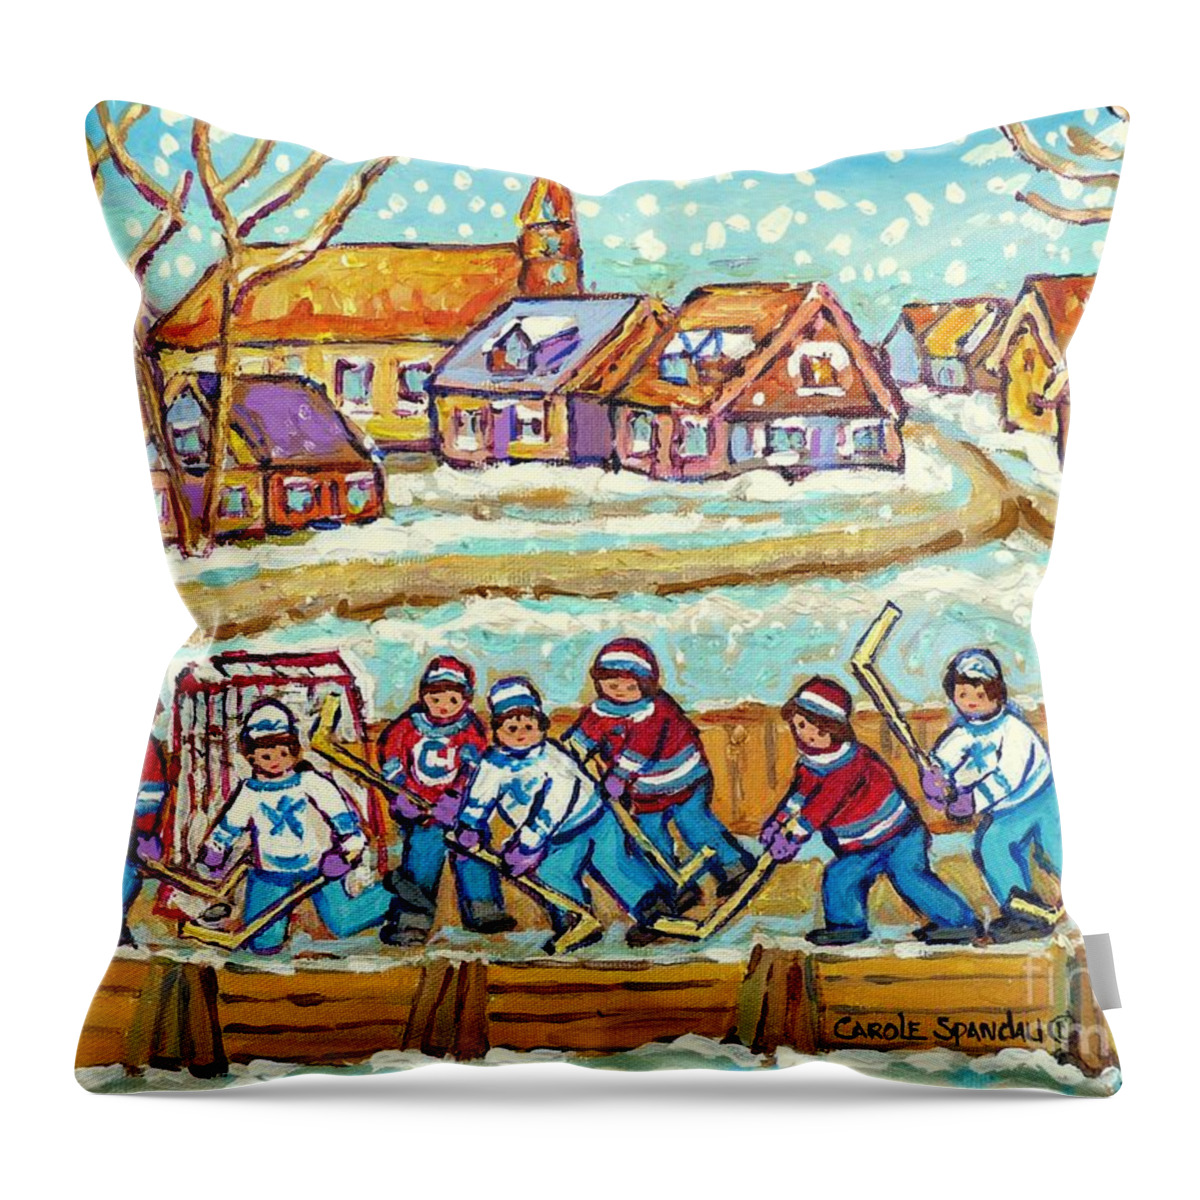 Hockey Throw Pillow featuring the painting Big Hockey Game Outdoor Ice Rink Snowy Winter Scene Painting Canadian Art C Spandau Quebec Artist  by Carole Spandau